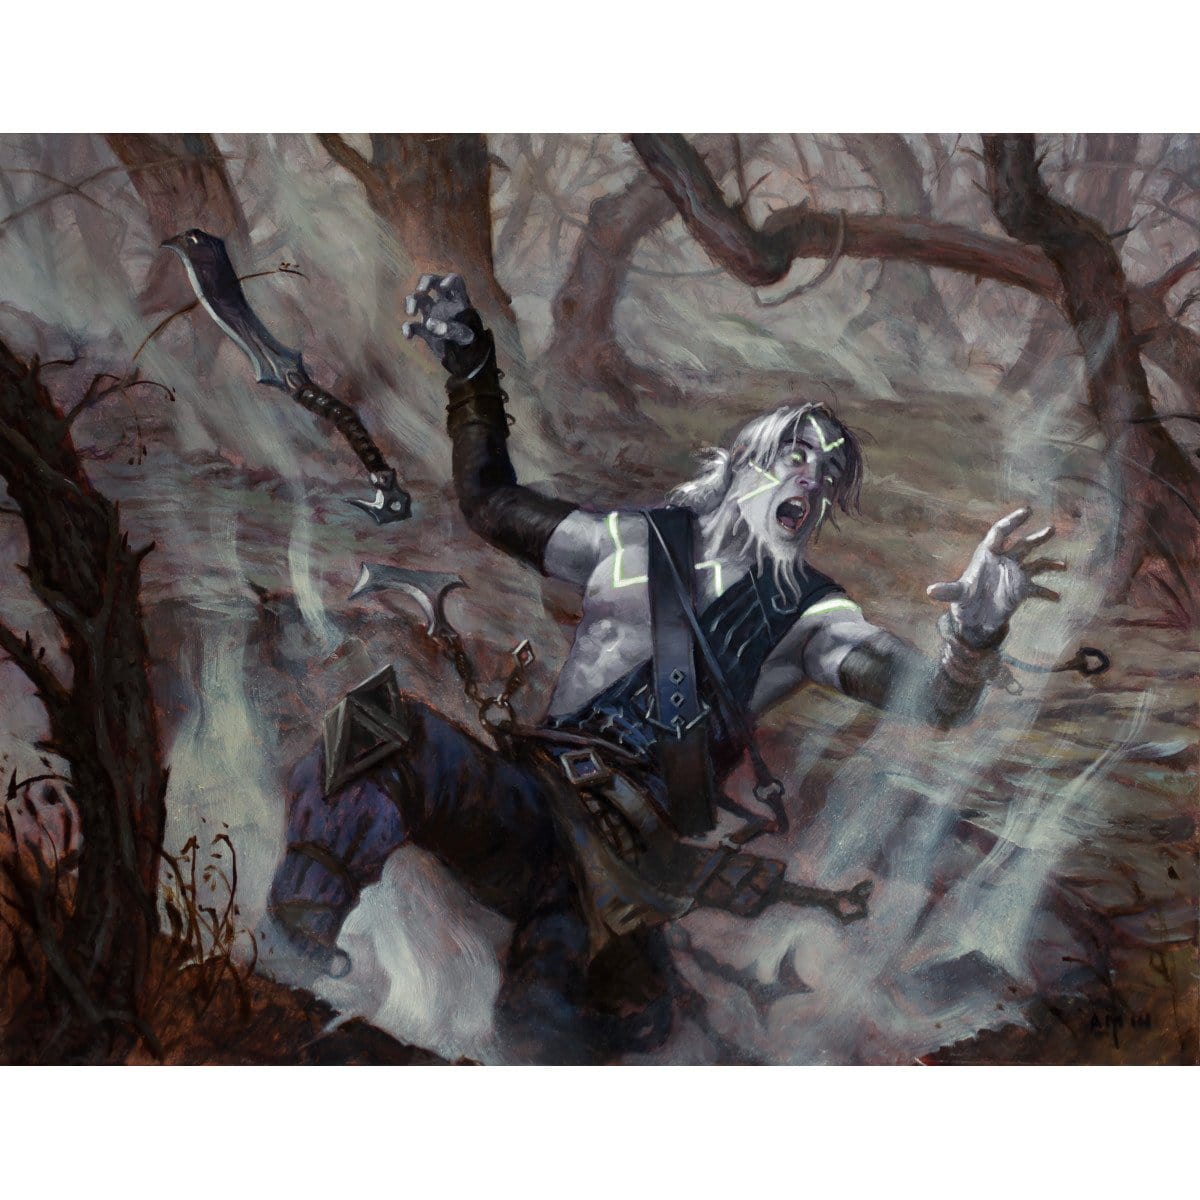 Ruinous Path Print - Print - Original Magic Art - Accessories for Magic the Gathering and other card games